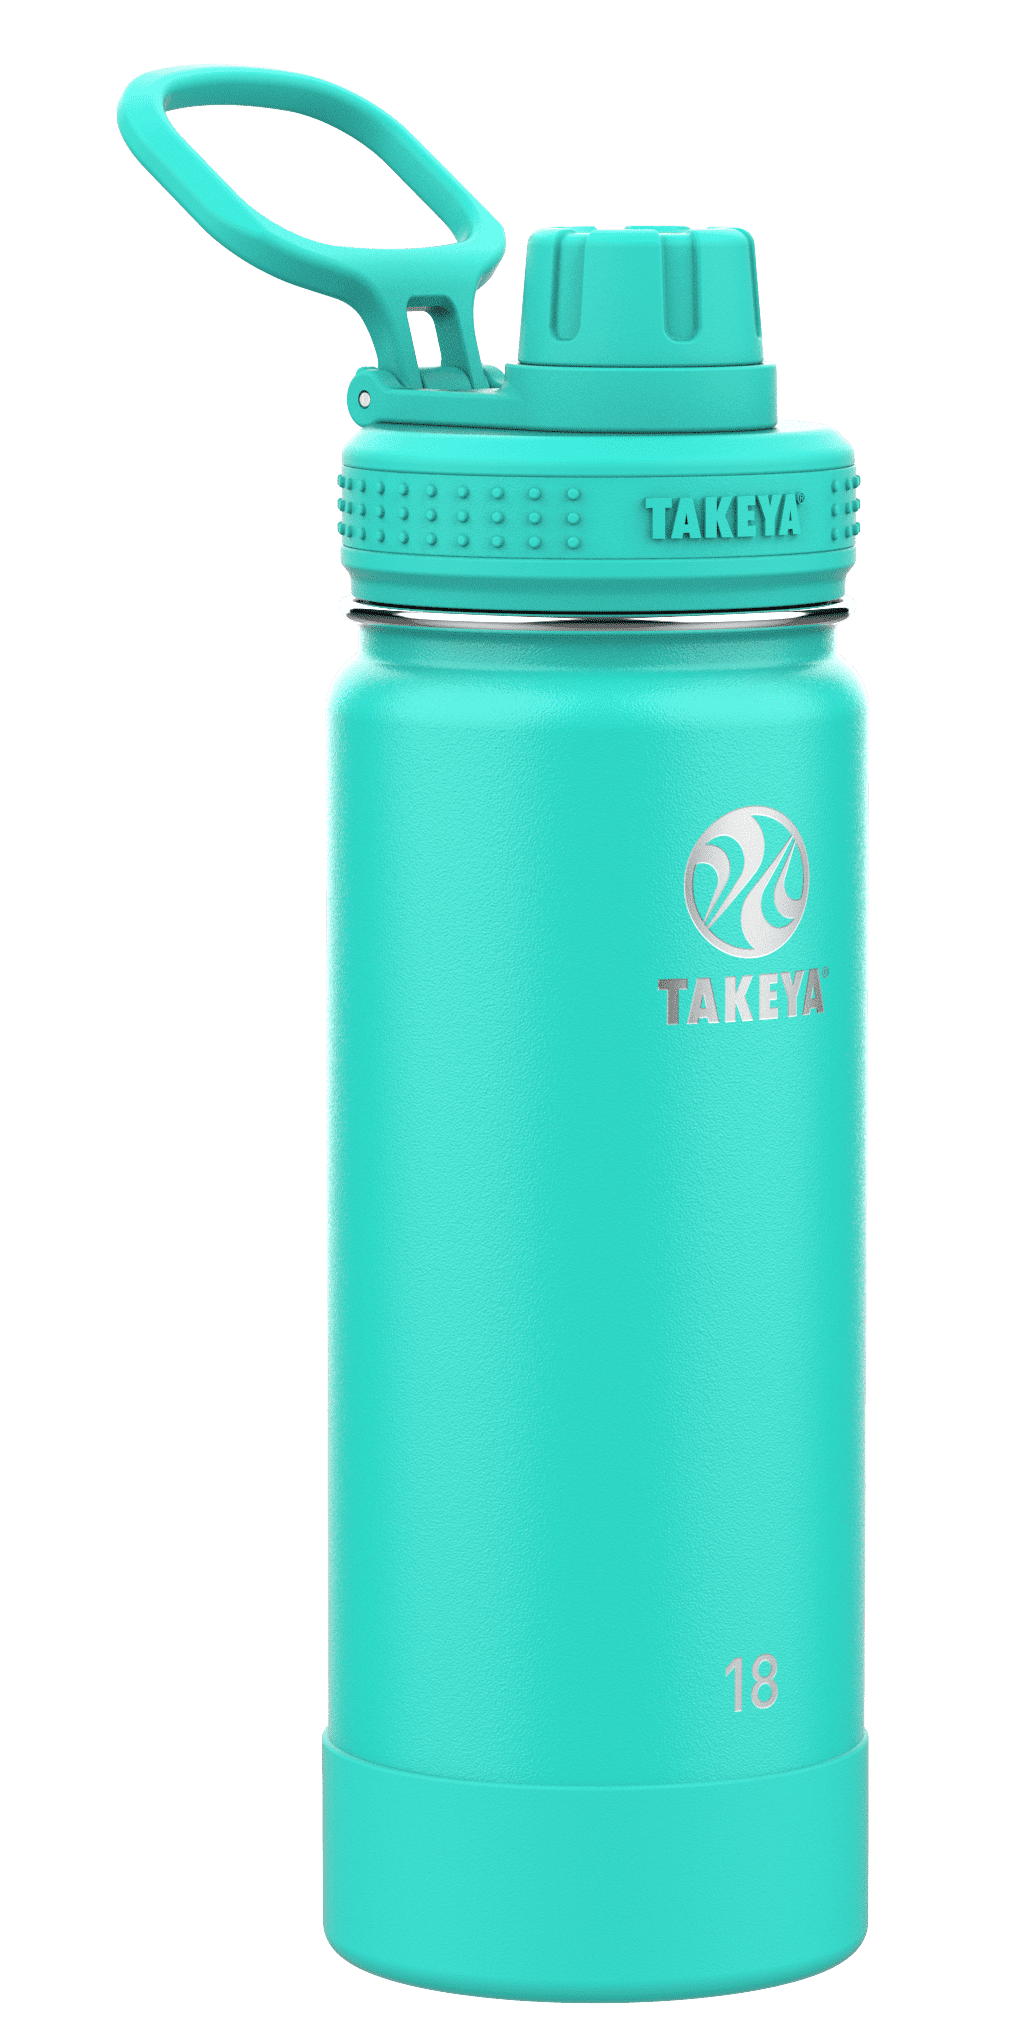 Takeya Actives 24 oz. Lilac Insulated Stainless Steel Water Bottle with  Straw Lid 51222 - The Home Depot